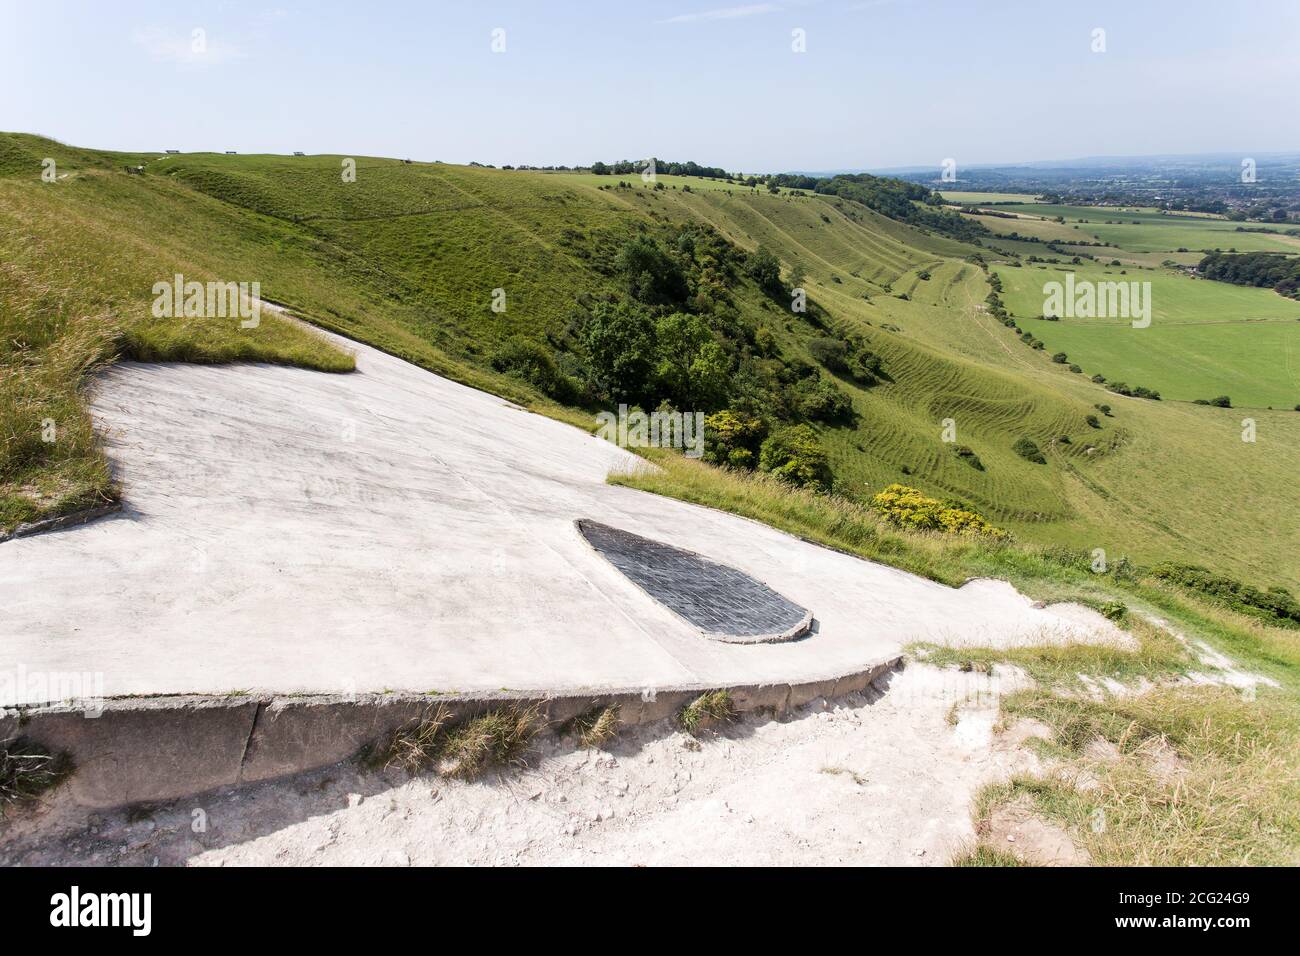 Eye of the White Horse on hill in Wiltshire, England, which was carved into chalk grassland in the late 1600s, Legend suggest it was created to commem Stock Photo